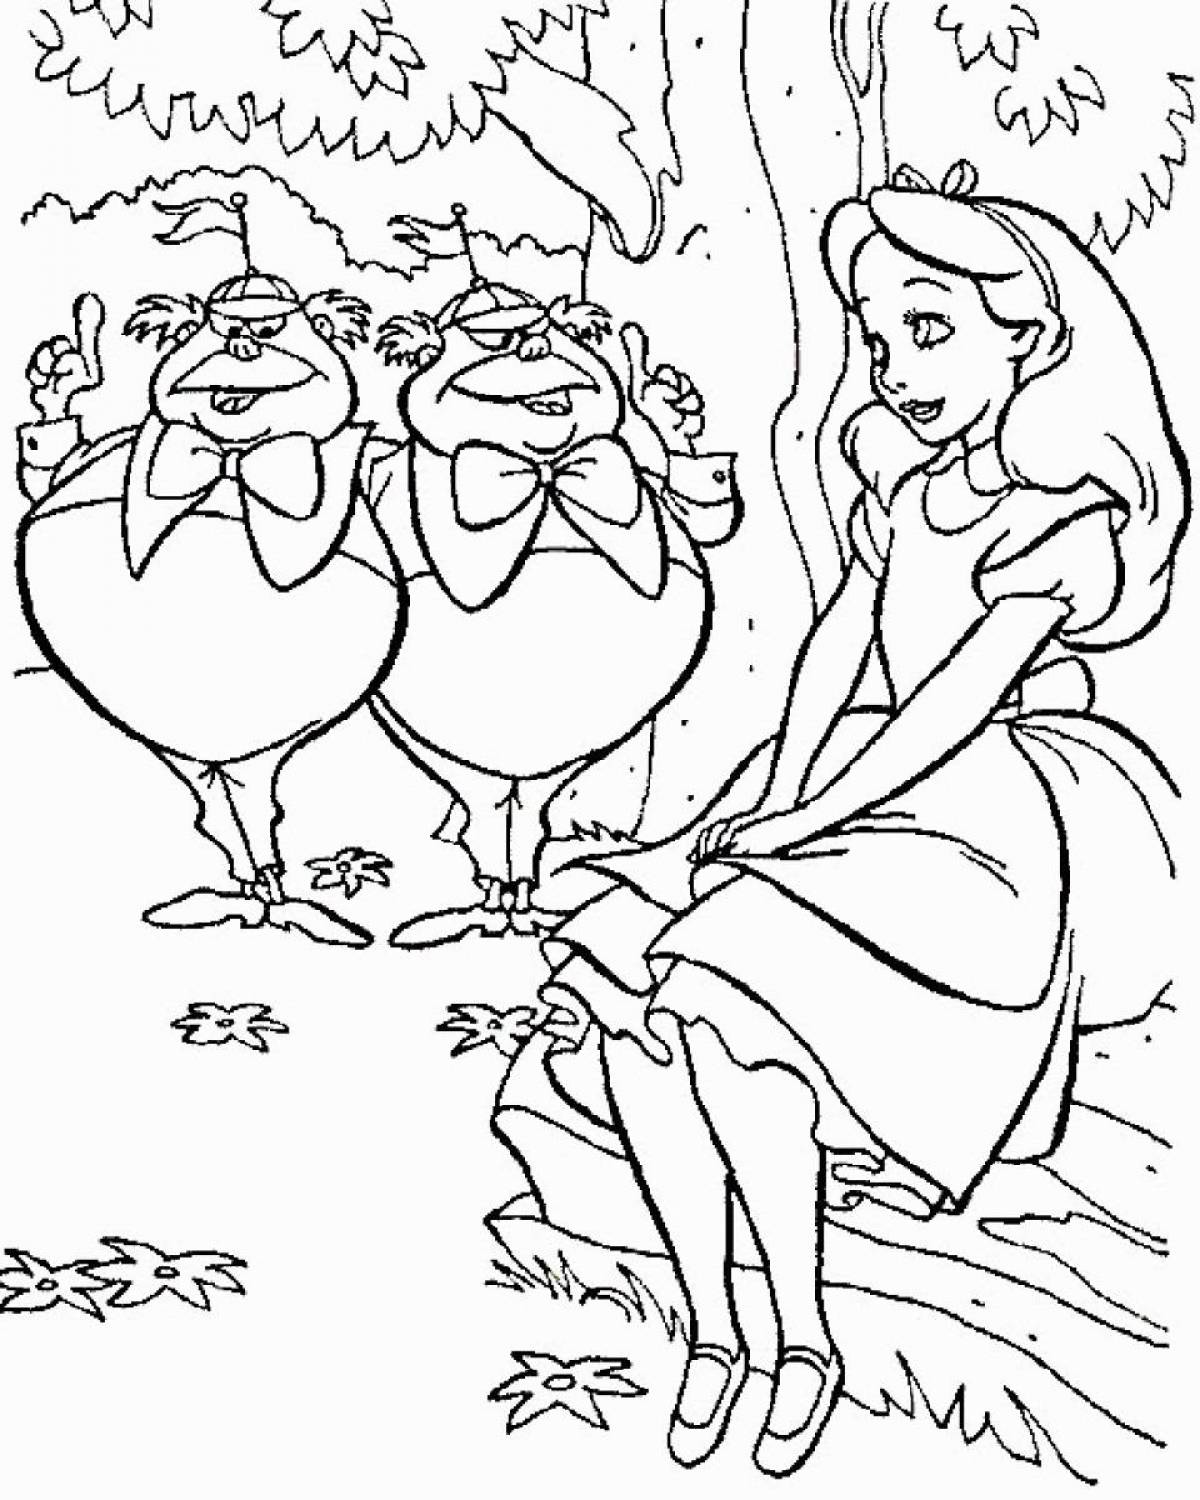 Alice's amazing coloring page